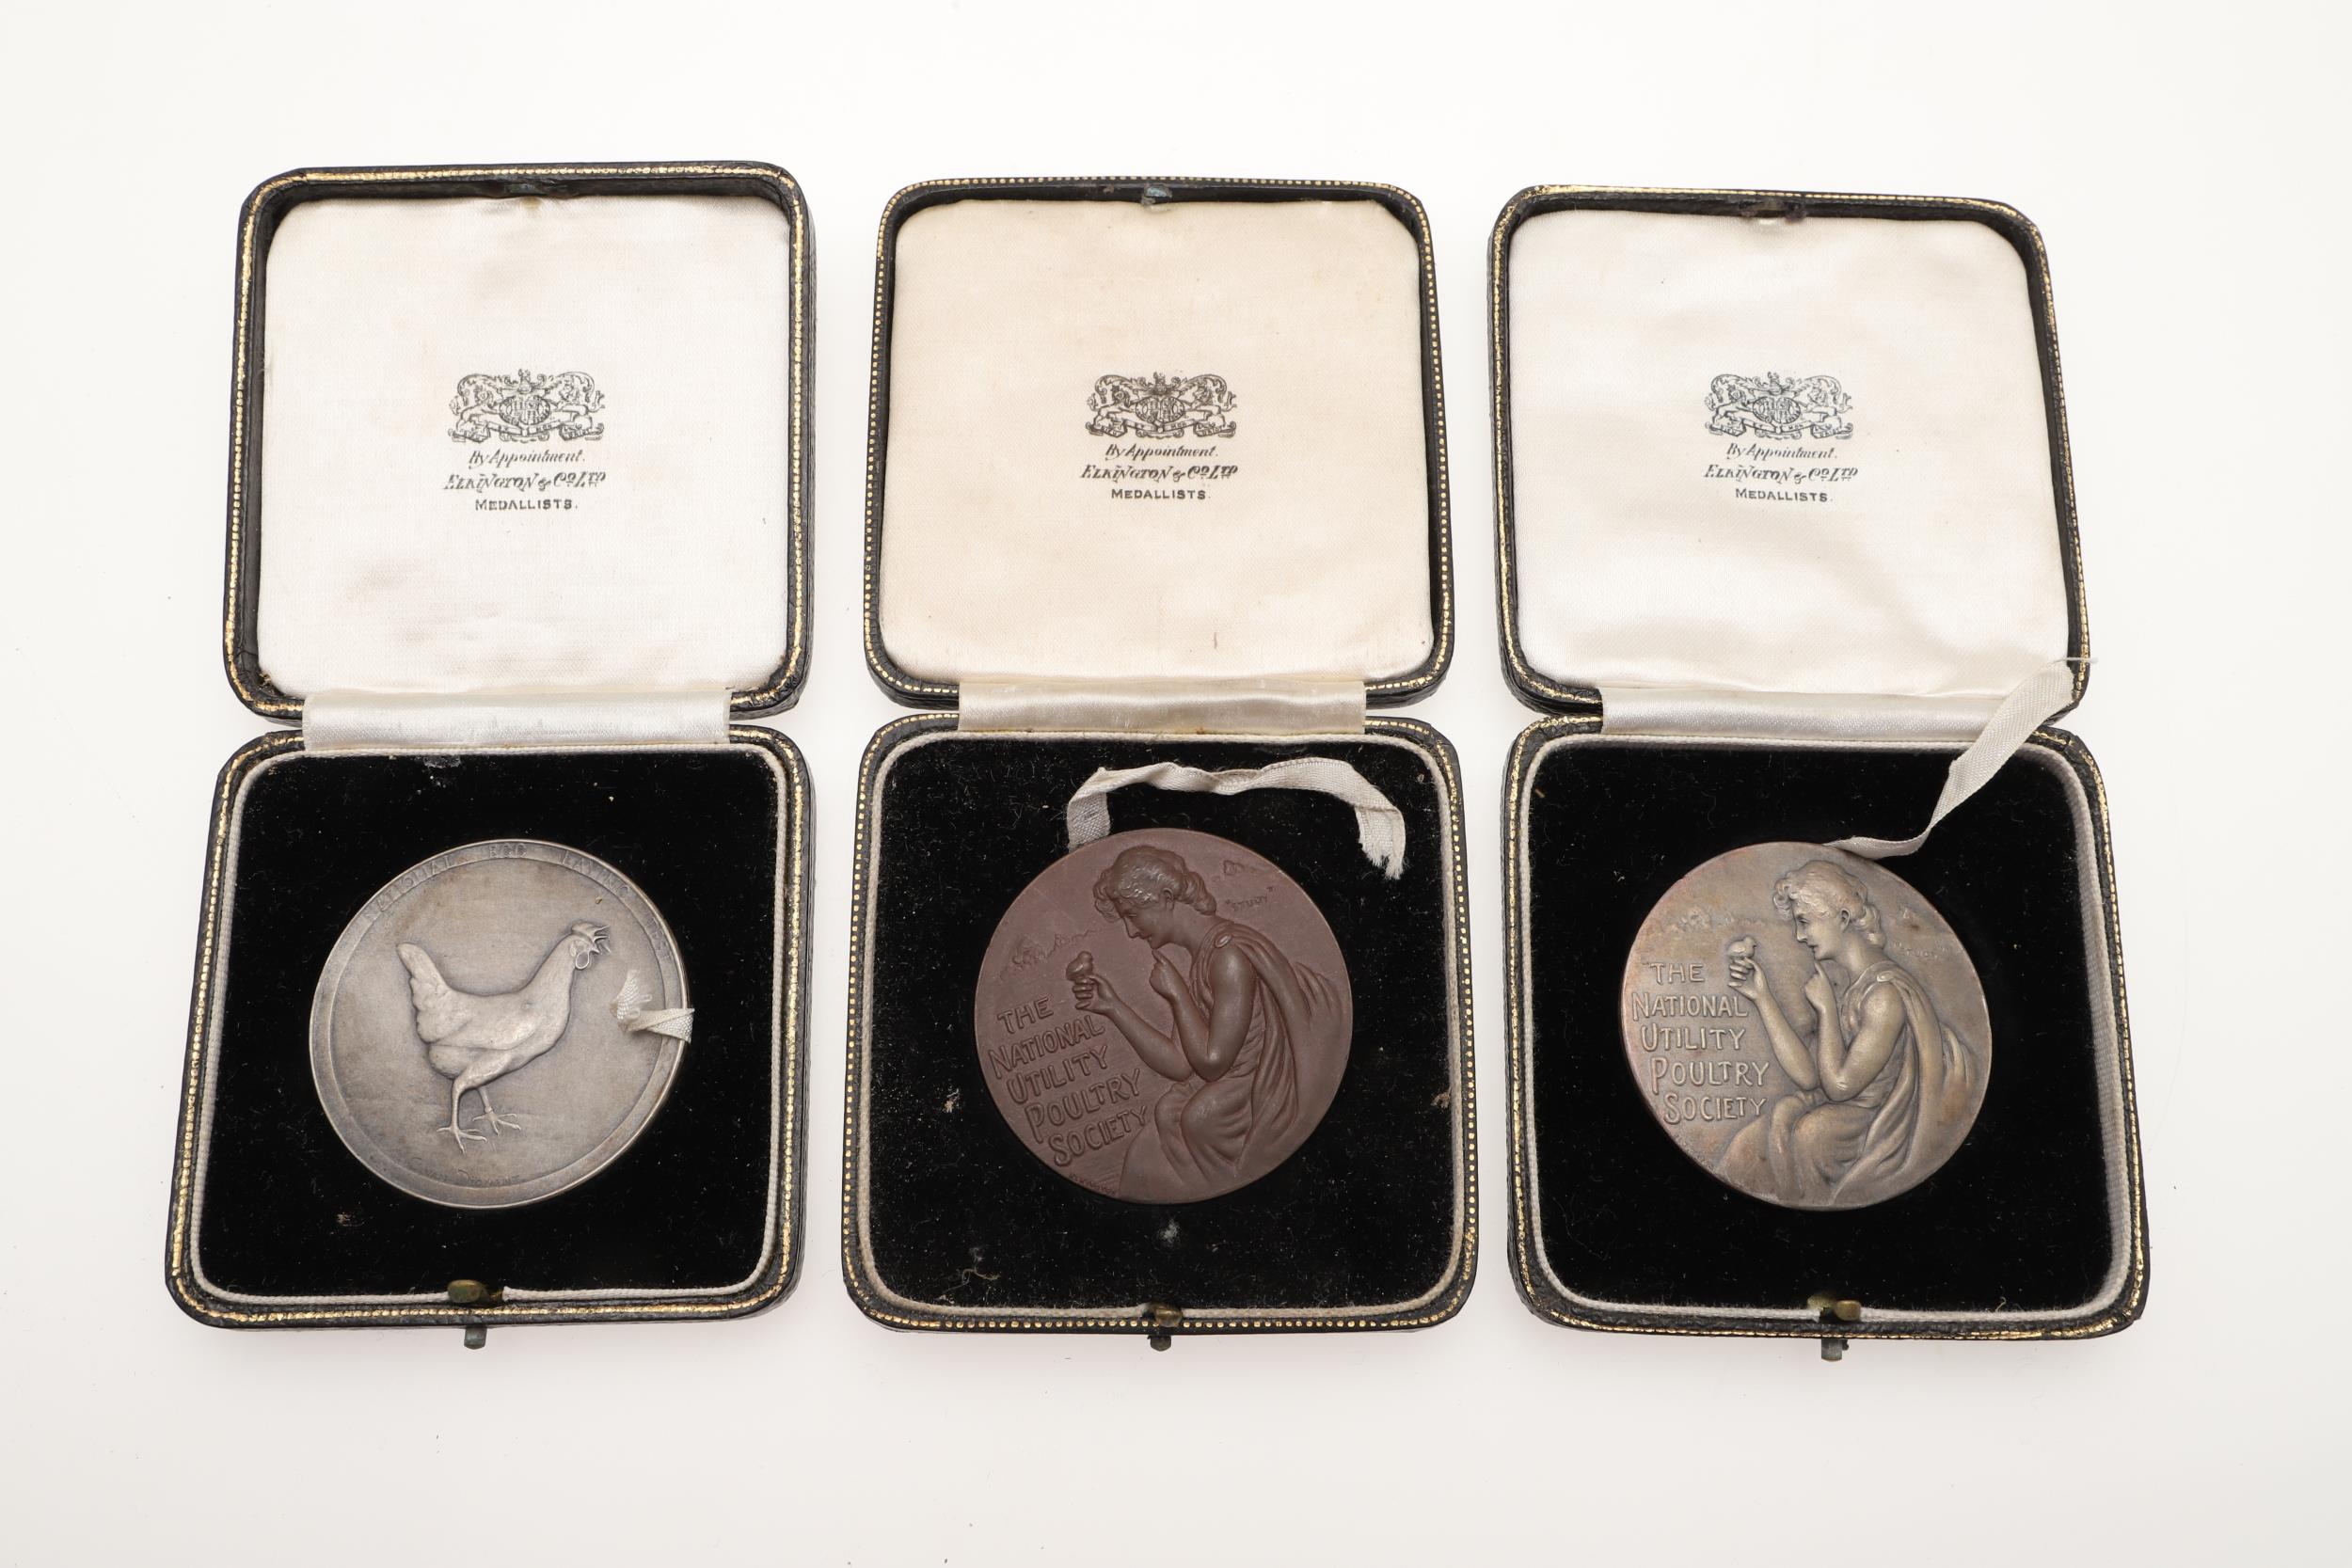 AN EXTENSIVE COLLECTION OF GOLD, SILVER AND BRONZE MEDALS FOR EGG LAYING. - Image 14 of 23